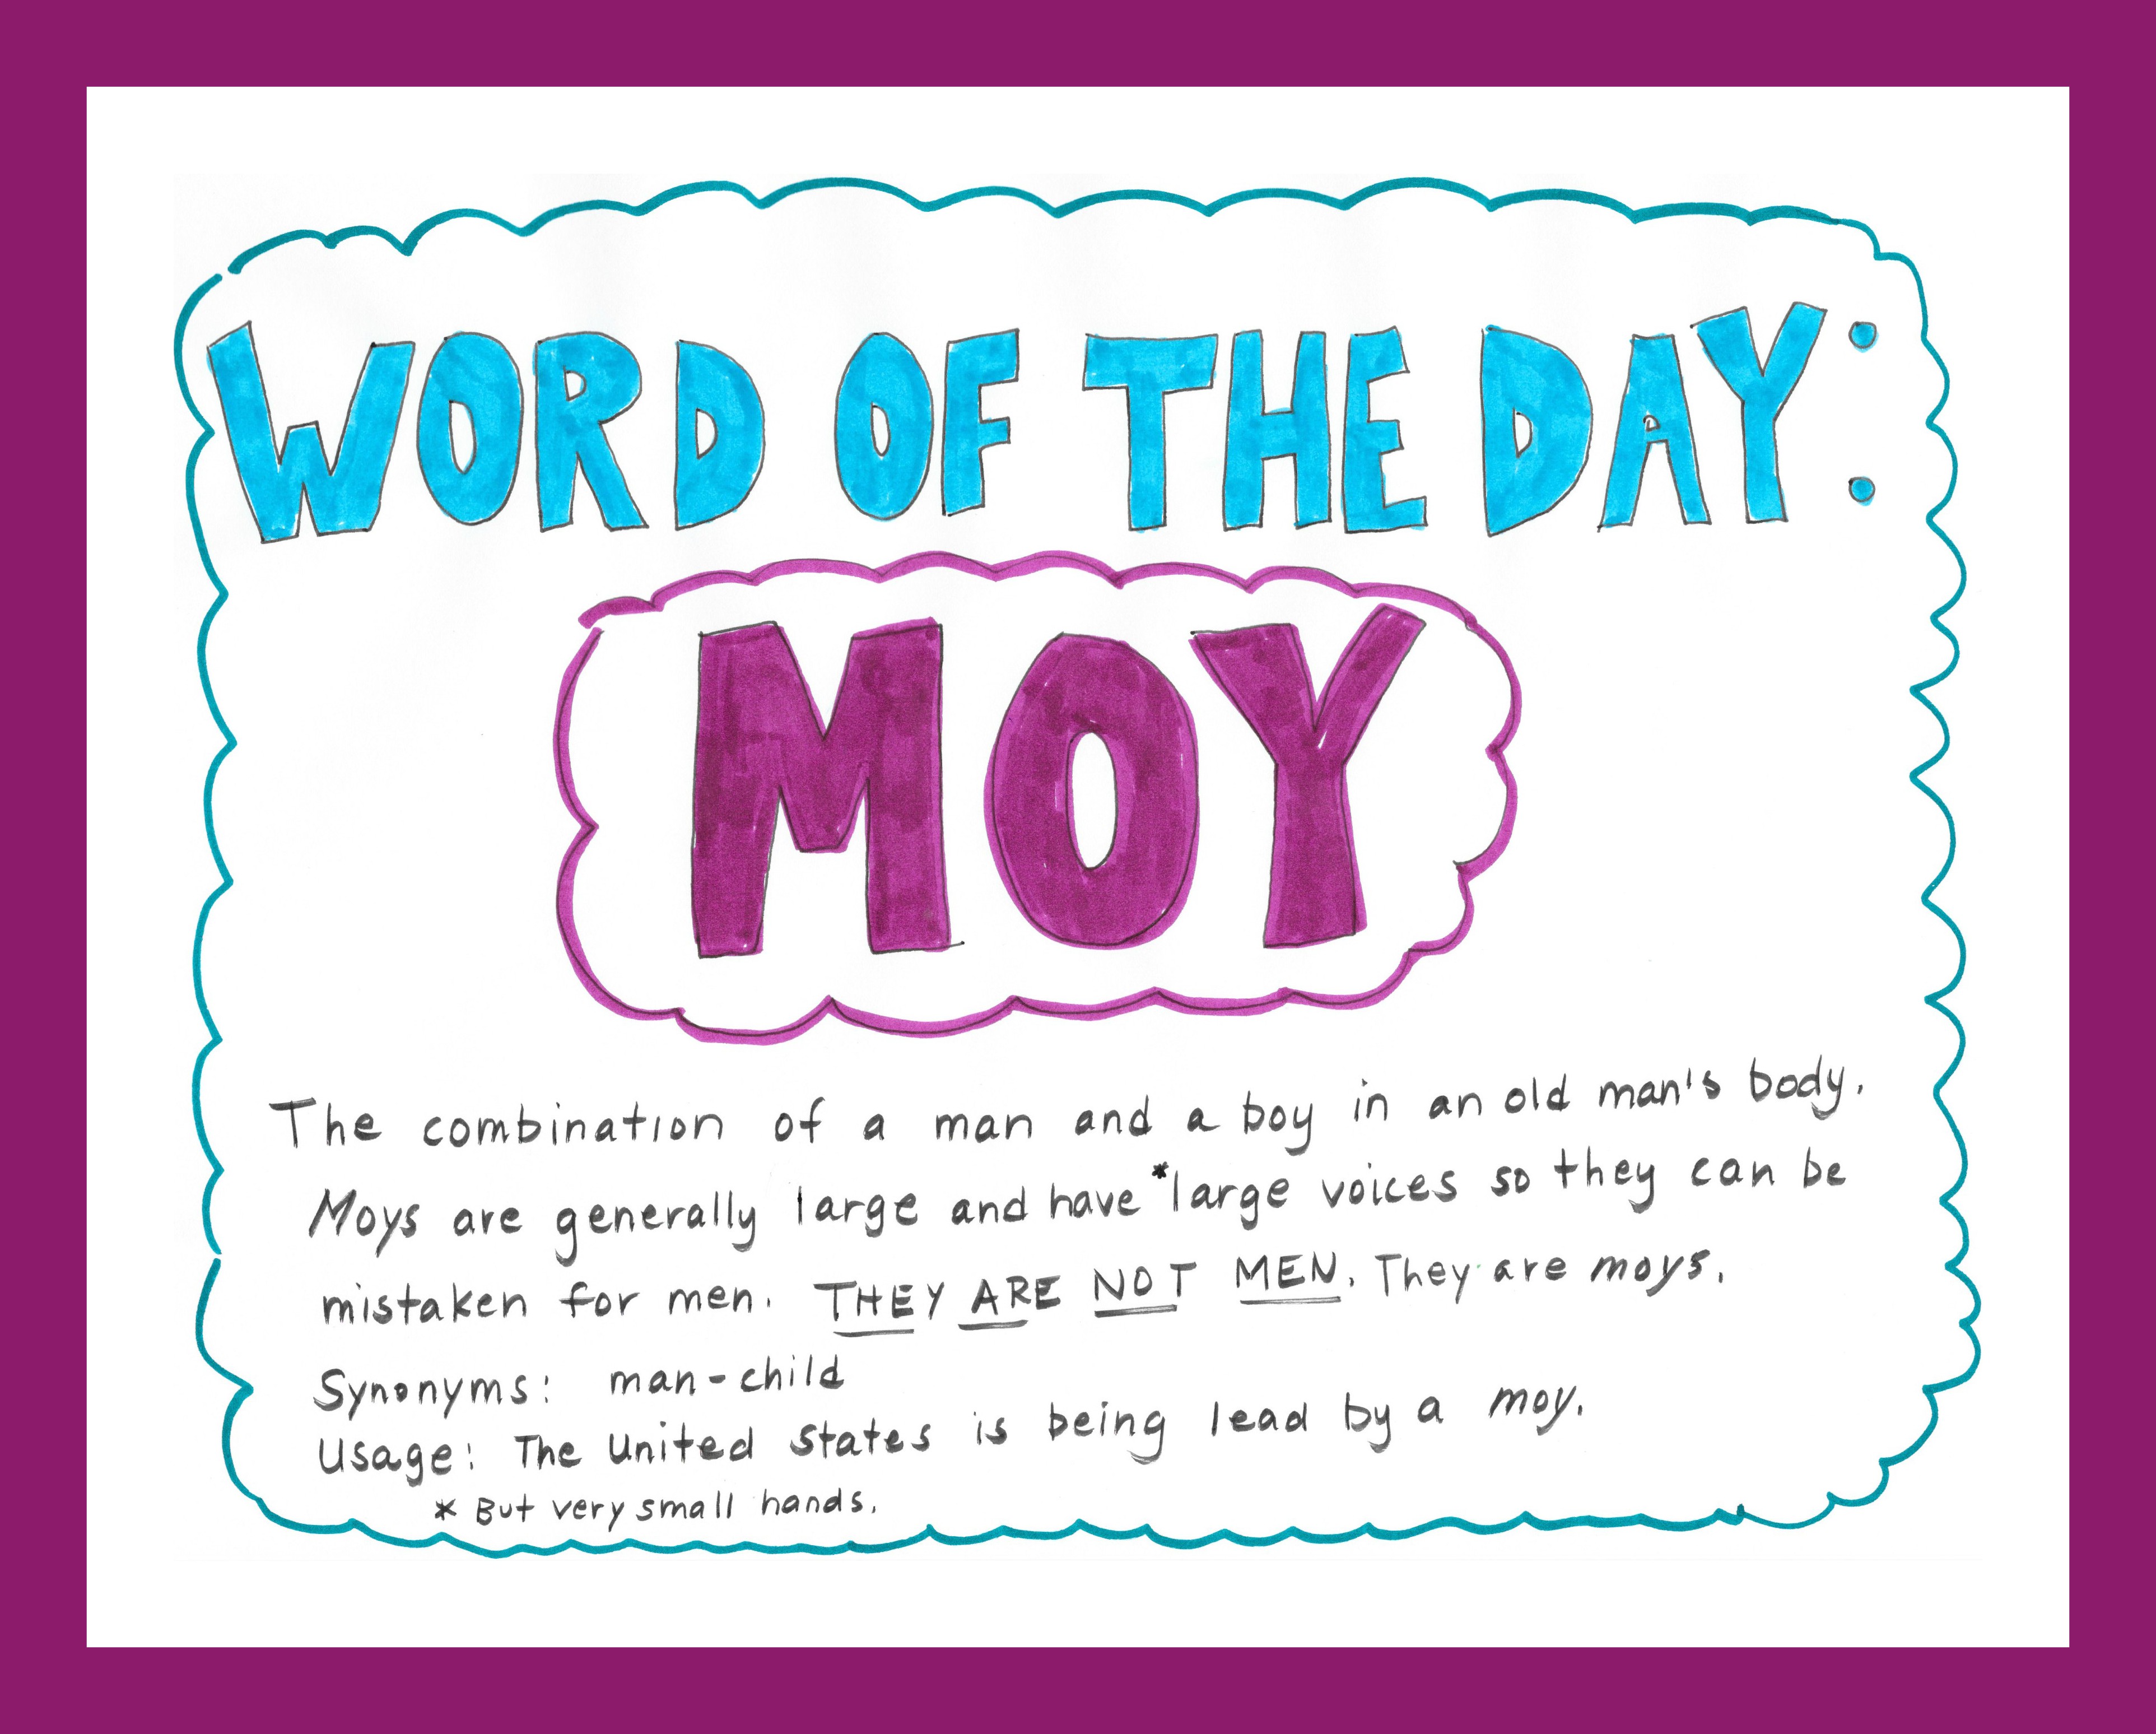 Word of the Day: Moy